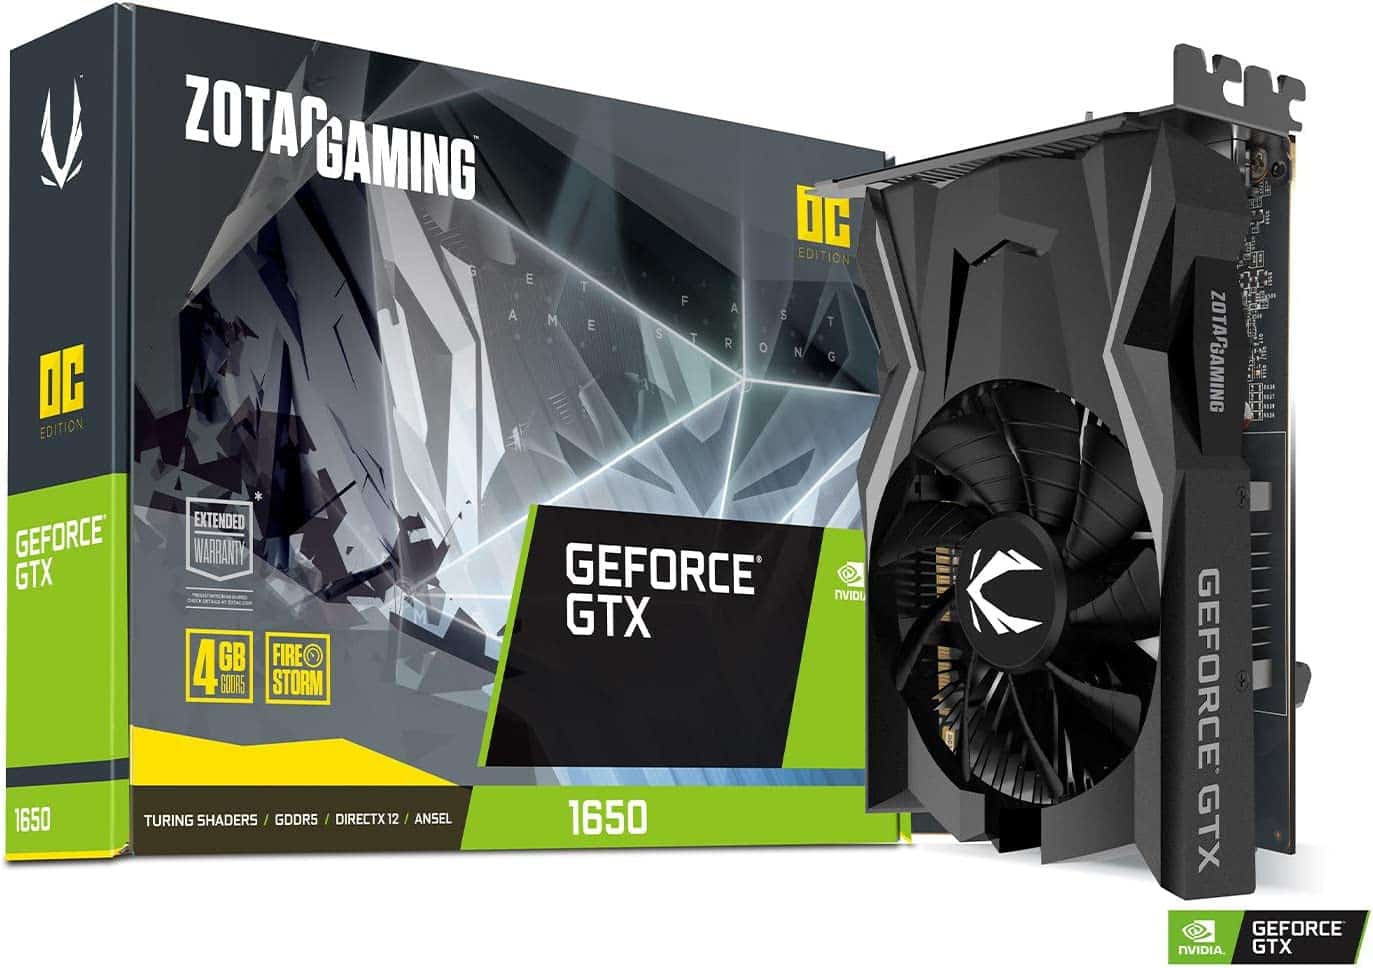 Is the GTX 1650 Good for Gaming? Is it Worth the Money?